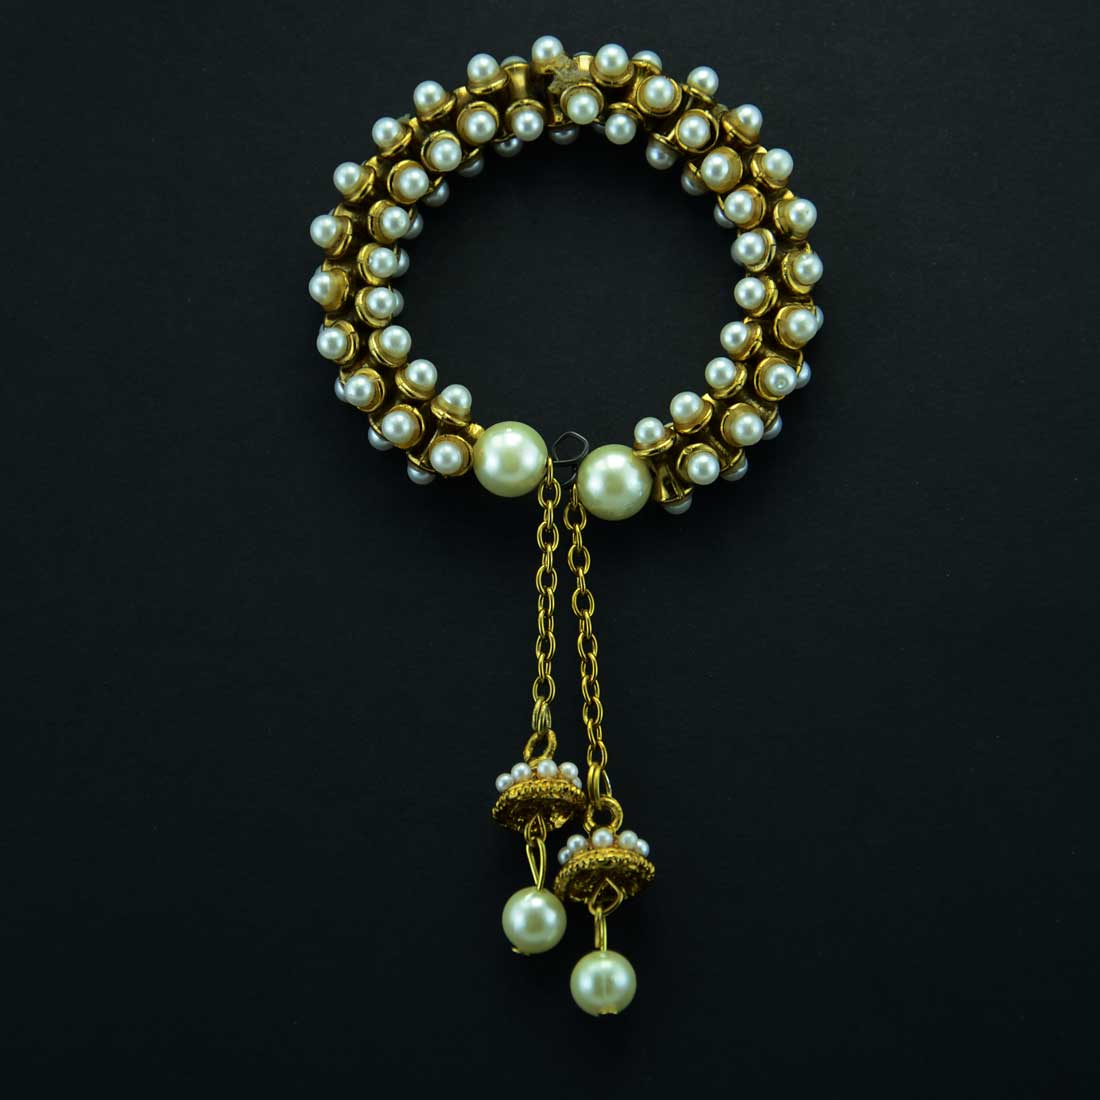 Gold Plated Beaded Bracelet With Tasseled Chain